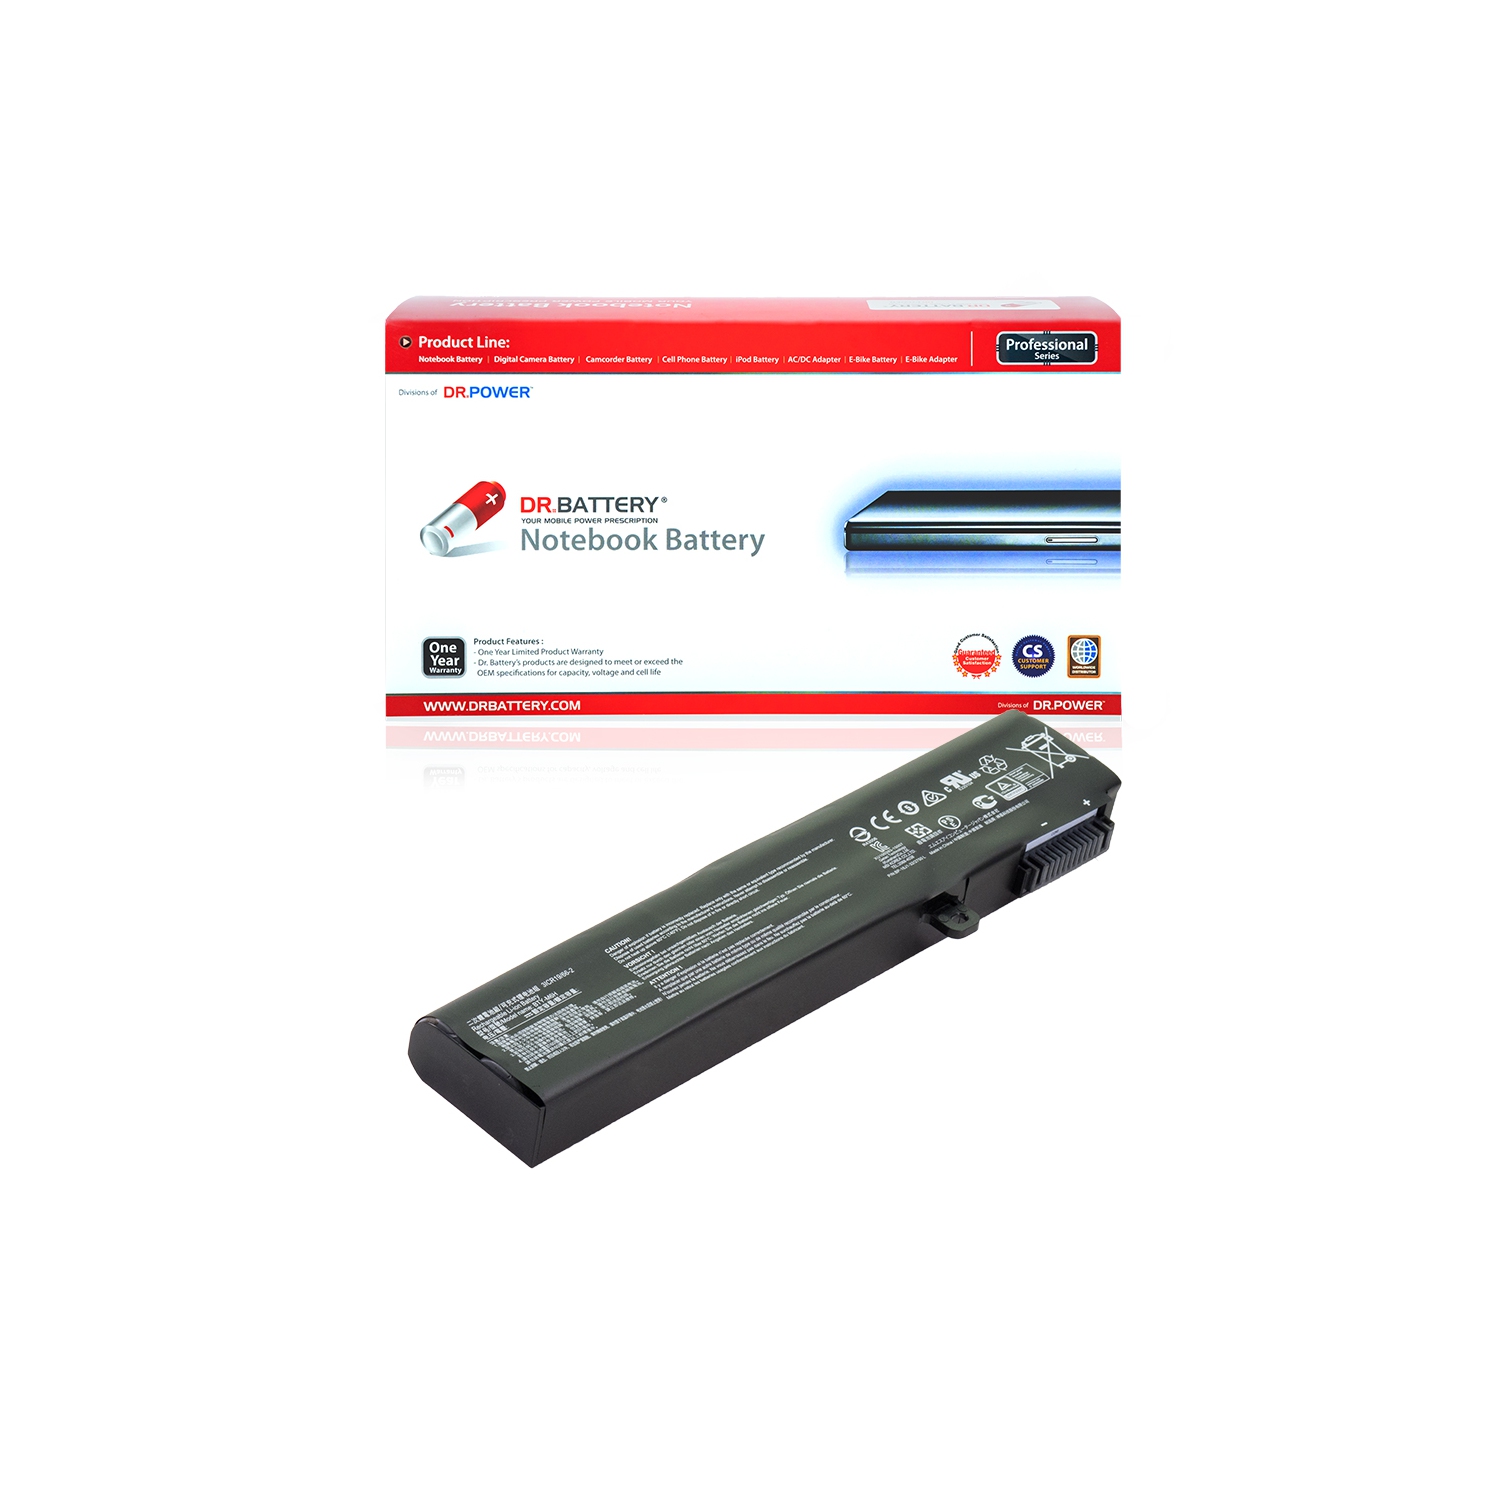 DR. BATTERY - Replacement for MSI GE72 6QC-287XCN / GE72 6QC-289XCN / GE72 6QD-001XCN / GE72 6QF / 3ICR19-66-2 / BTY-M6H